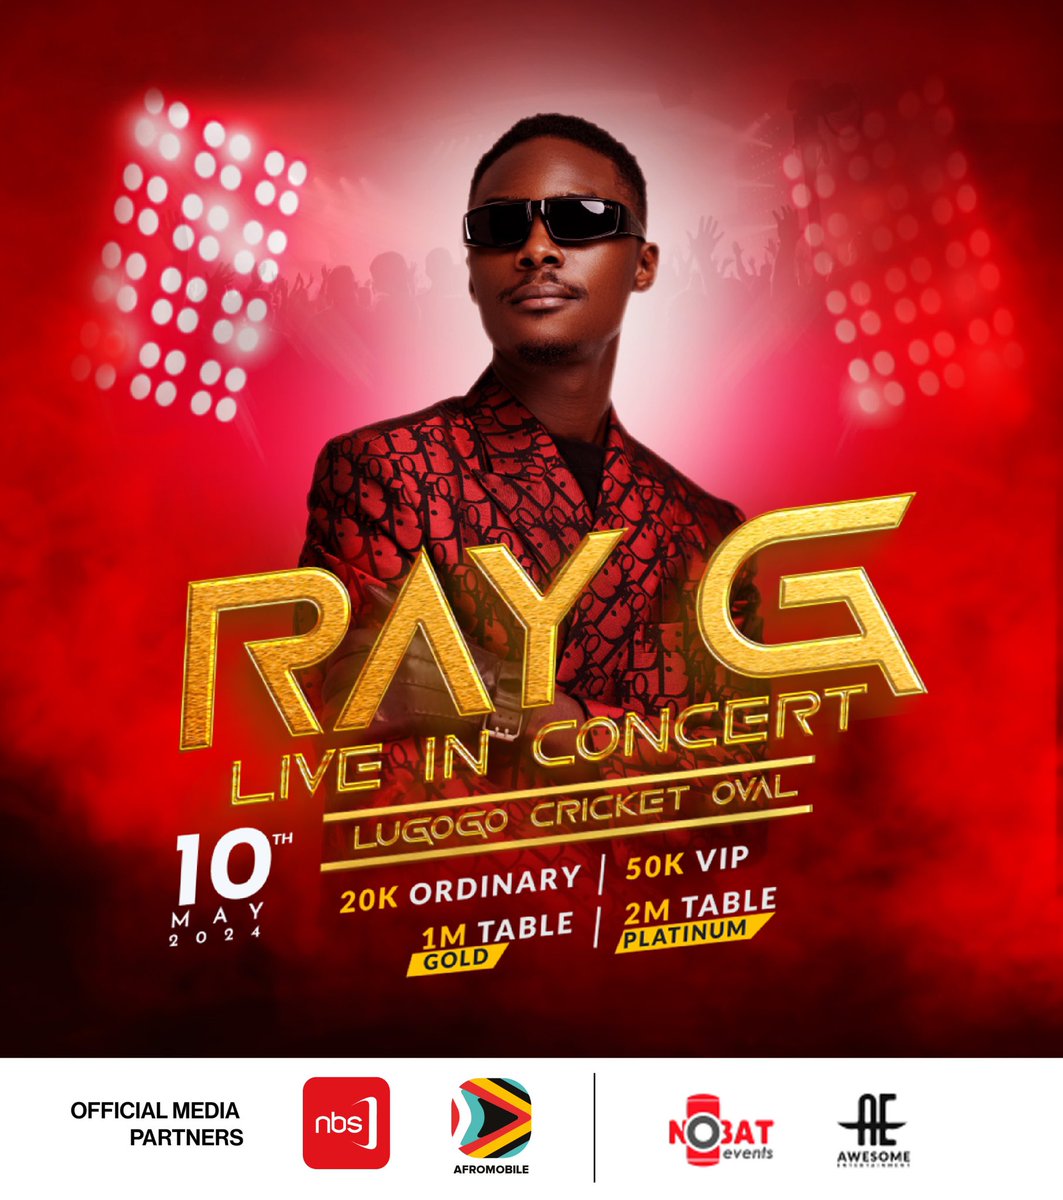 Save the date! #RayGLiveInConcert is coming to Lugogo Cricket Oval on May 10th, 2024. Don't miss out on the electrifying performance. #SanyukaUpdates